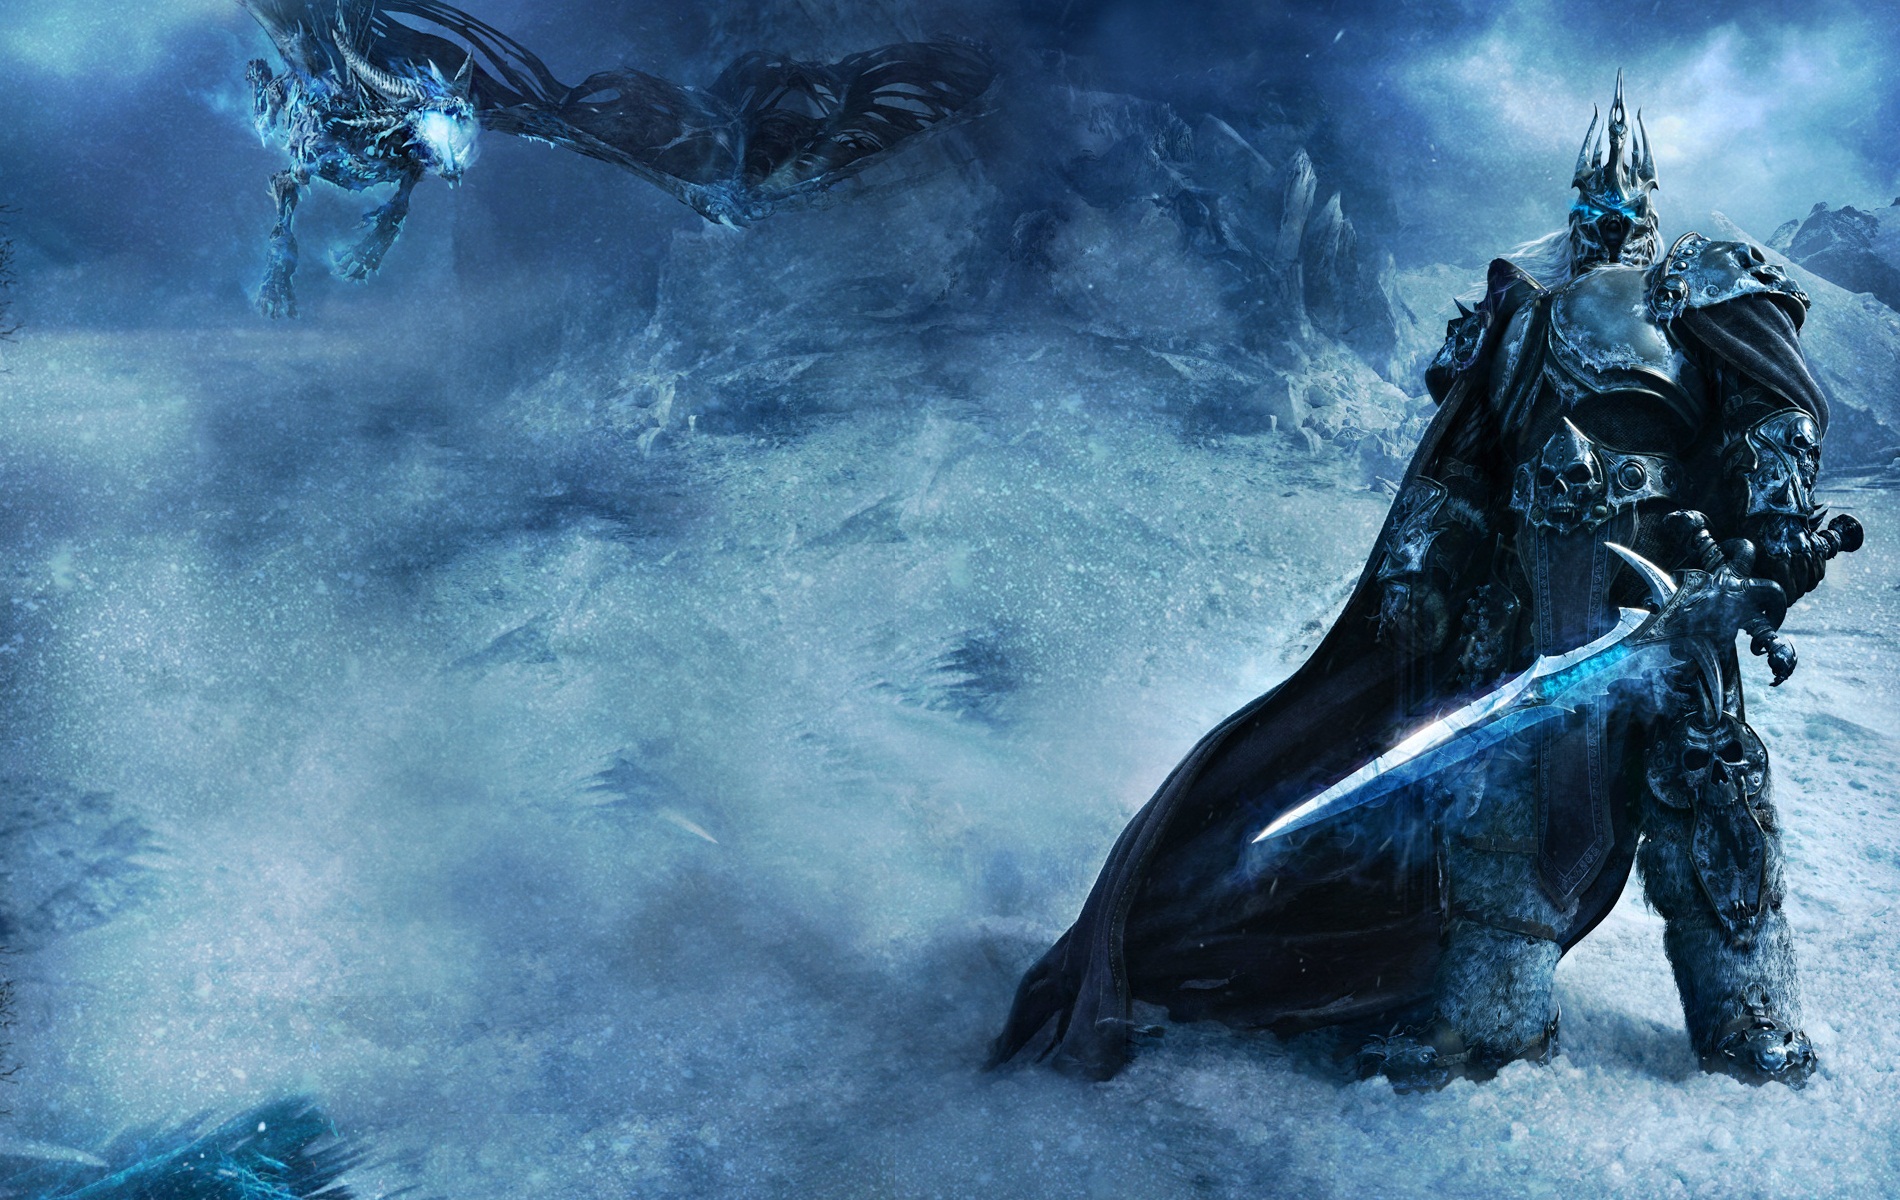 Digital artwork of a legendary creature Sindragosa and the Lich King from video game World of Warcraft.